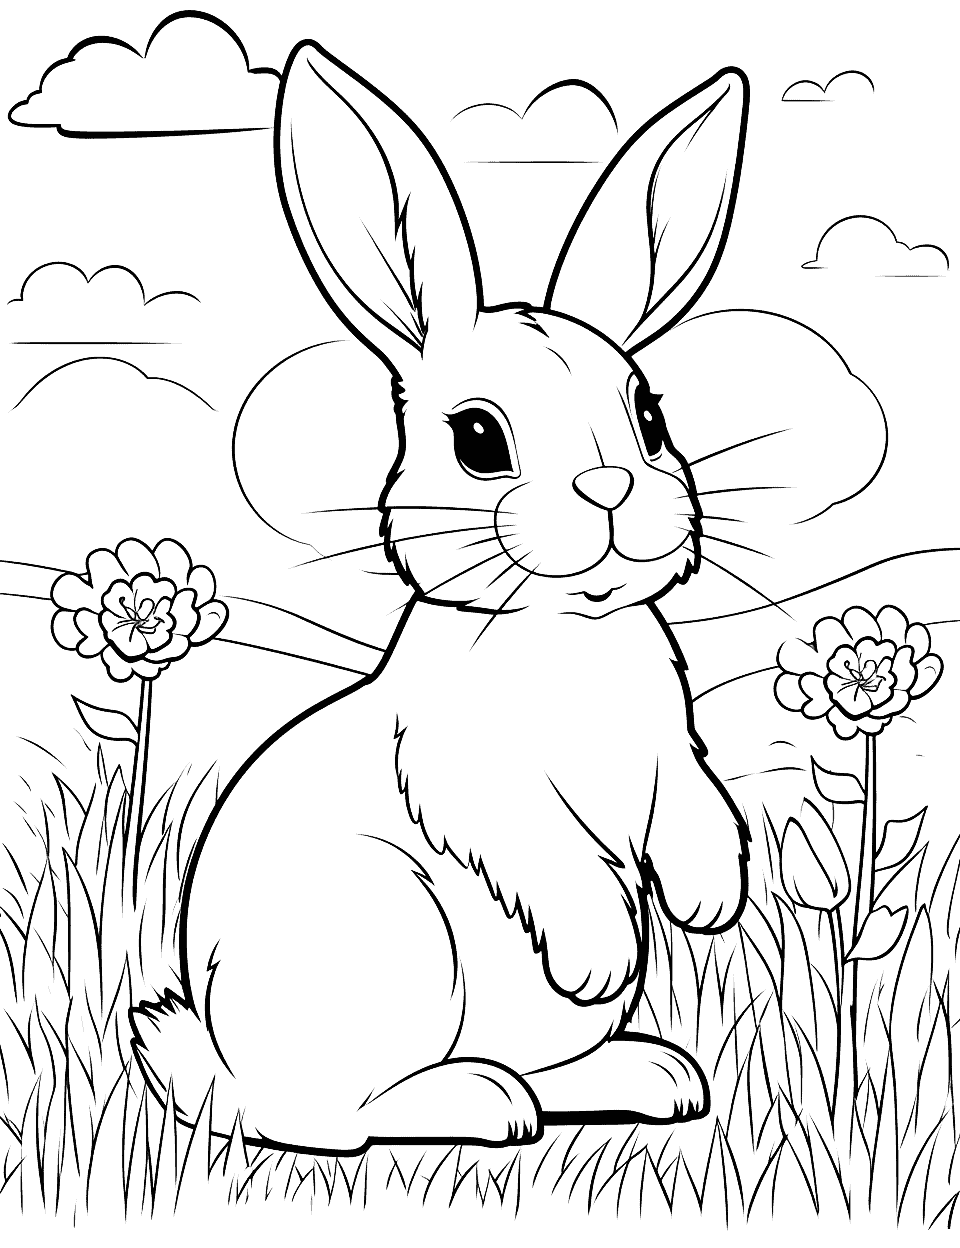 Realistic Rabbit in the Meadow Bunny Coloring Page - The real details of a rabbit, with every strand of fur, set against a backdrop of a serene meadow.